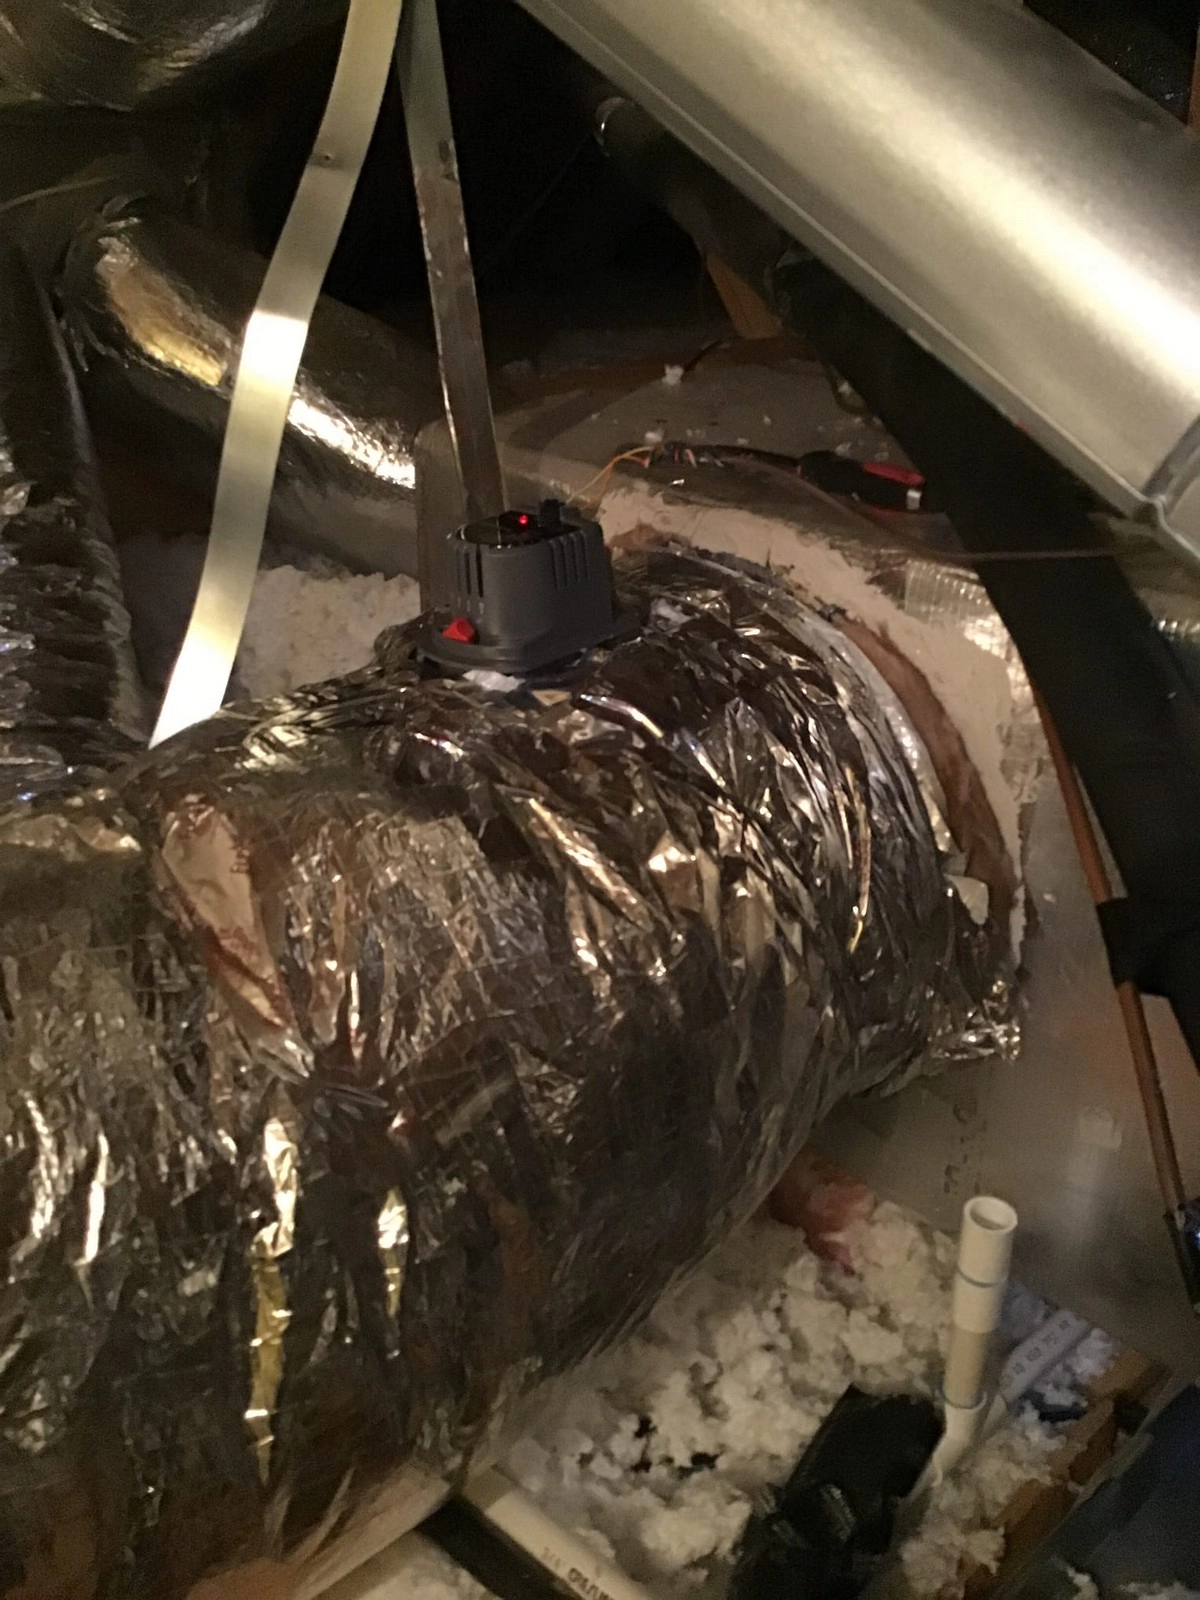 A section of ductwork made up of tubing used to distribute hot air through the rest of a ventilation system.